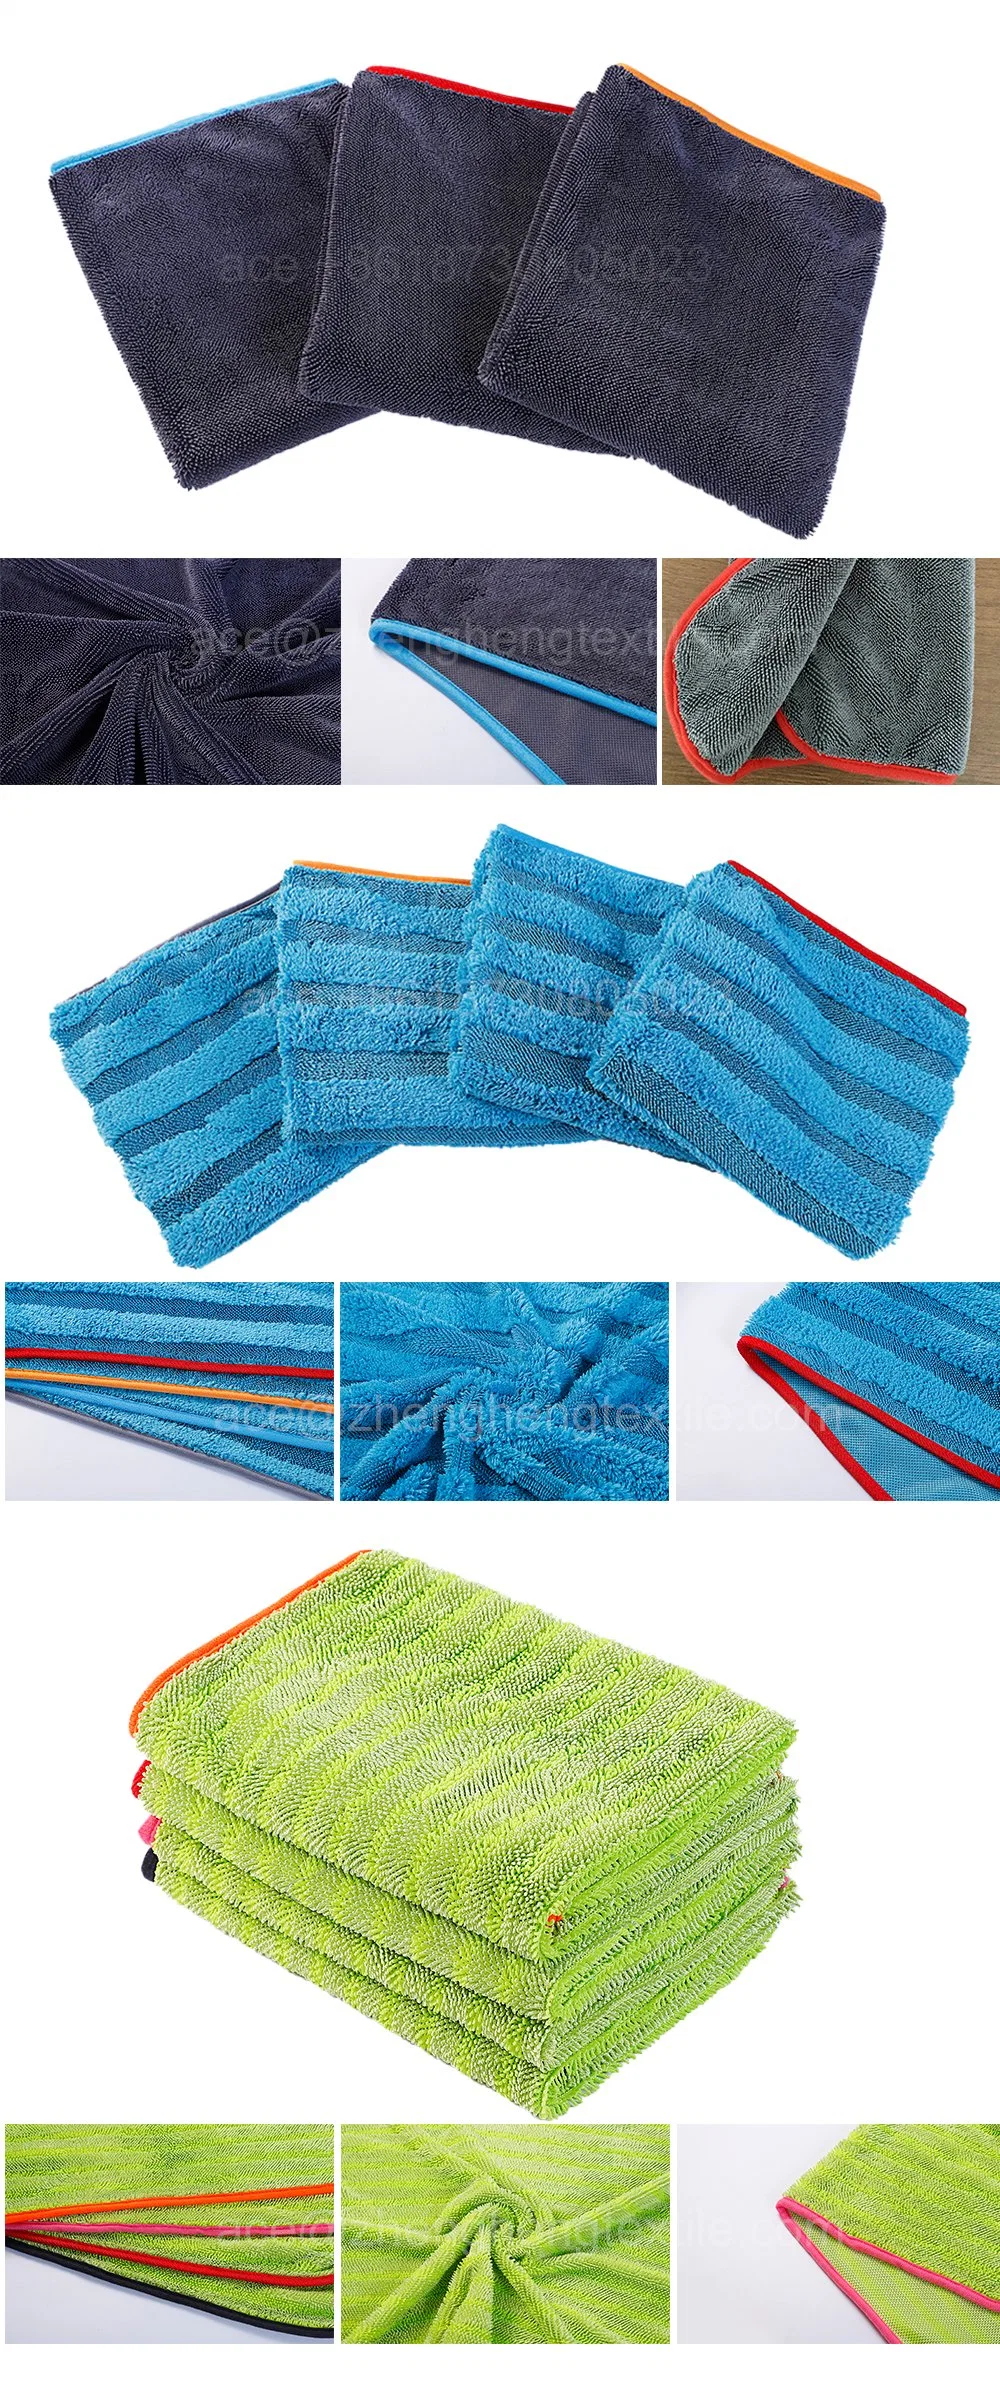 Stripe Design Twisted Loop Terry Drying Towel for Auto Care, 60*90cm Twister Microfiber Cleaning Cloth